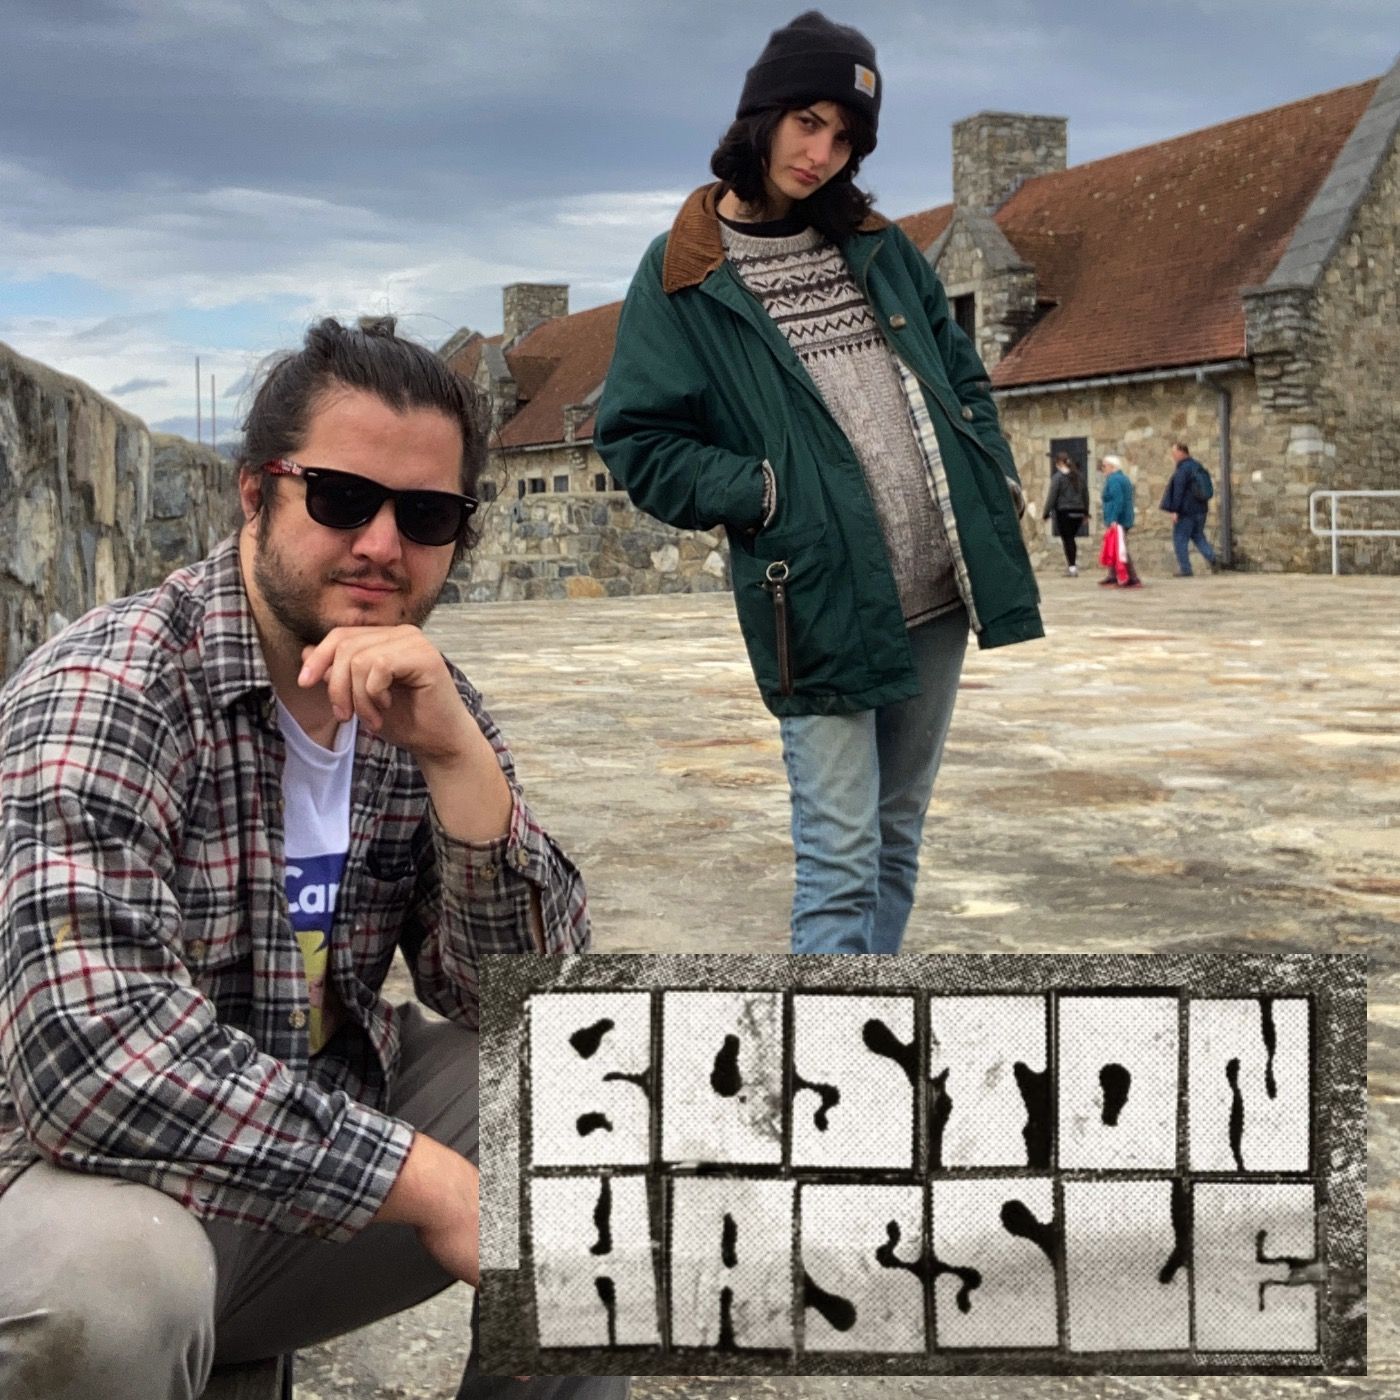 Brian & Theo interviewed by Joey Wolongevicz for the Boston Hassle